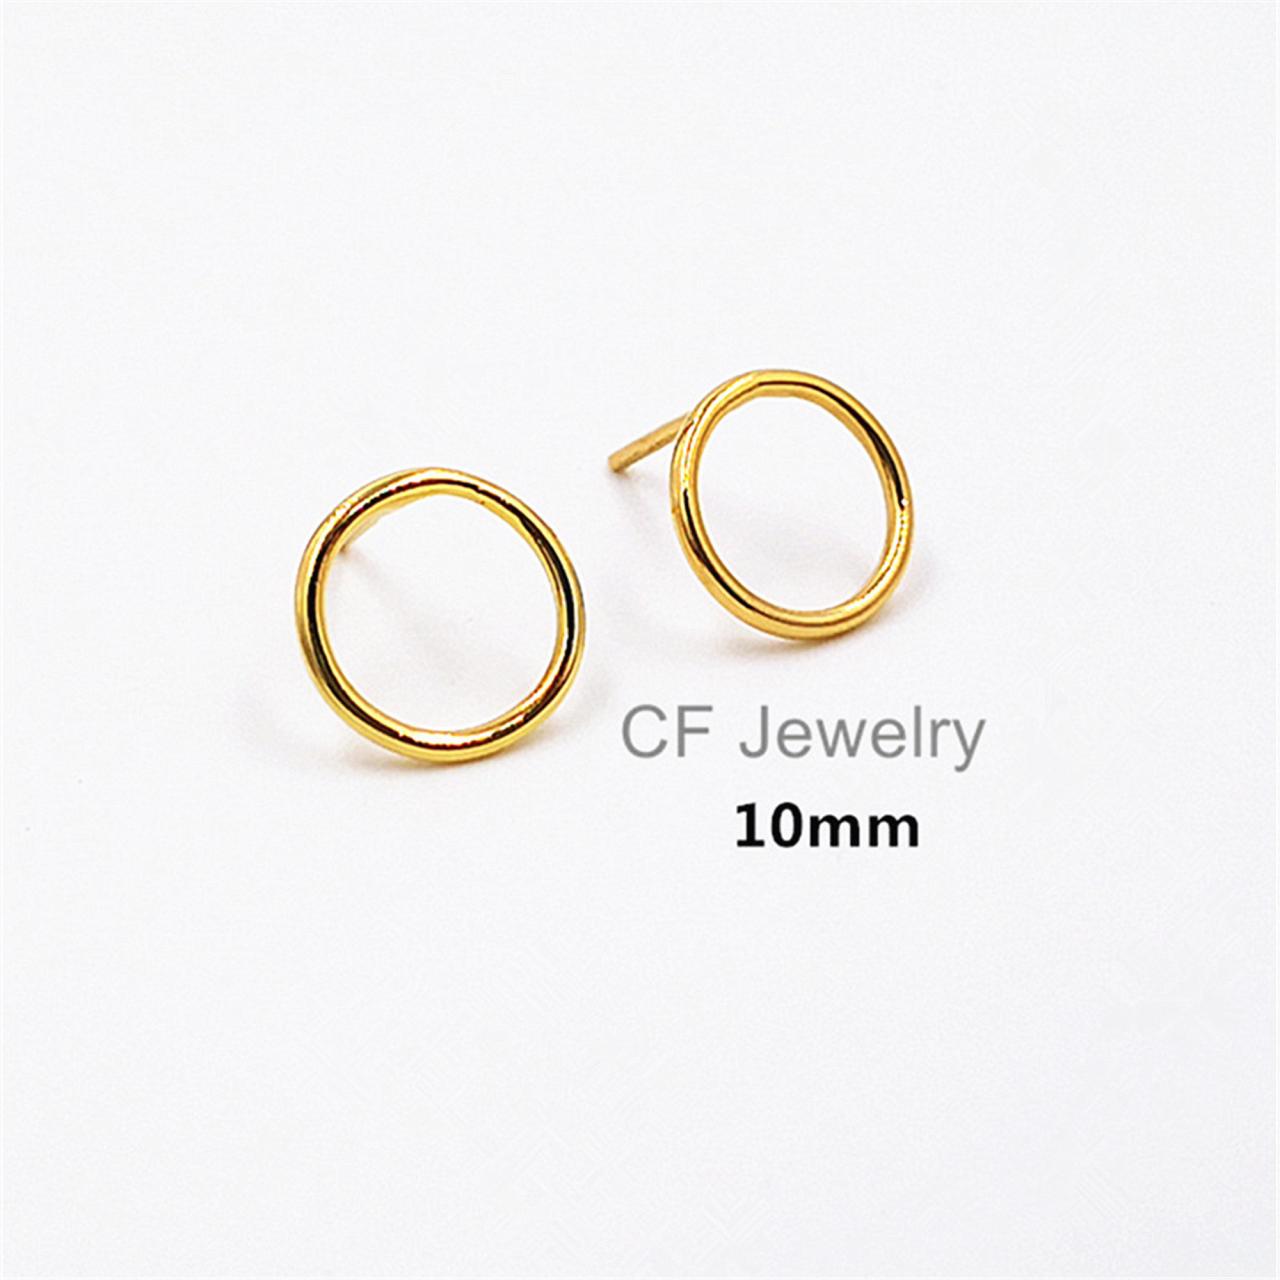 Open Circle Studs Gold Circle Earrings Silver Sterling Open Circle Earrings Rose Gold Circle Stud Earrings Small Circle Earrings